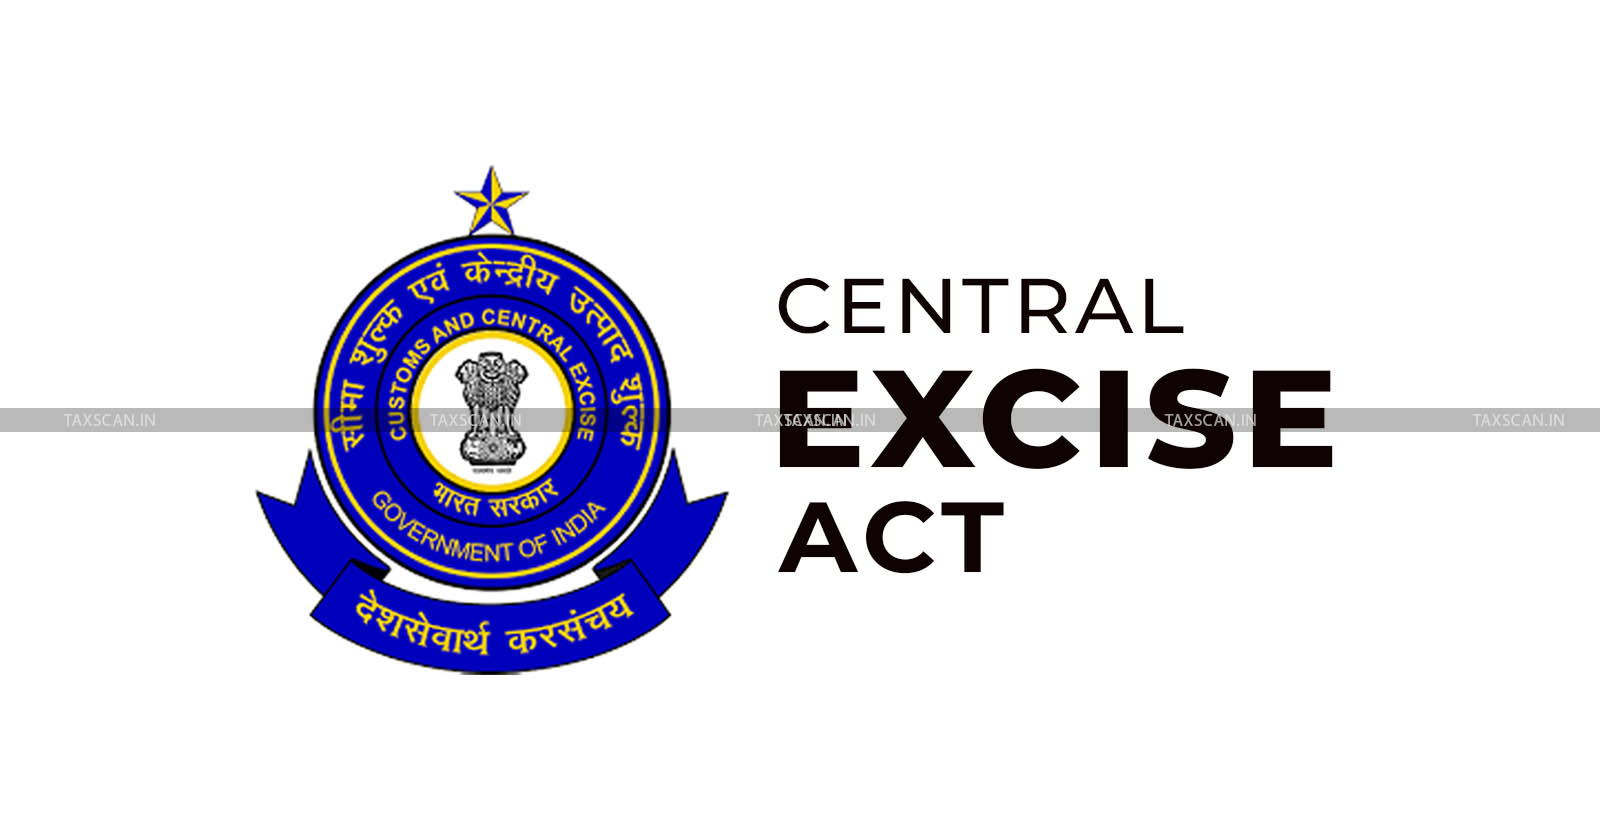 Central Excise Act - Central Excise - Paid before Issuance of SCN - Issuance of SCN - CESTAT - show cause notice - TAXSCAN